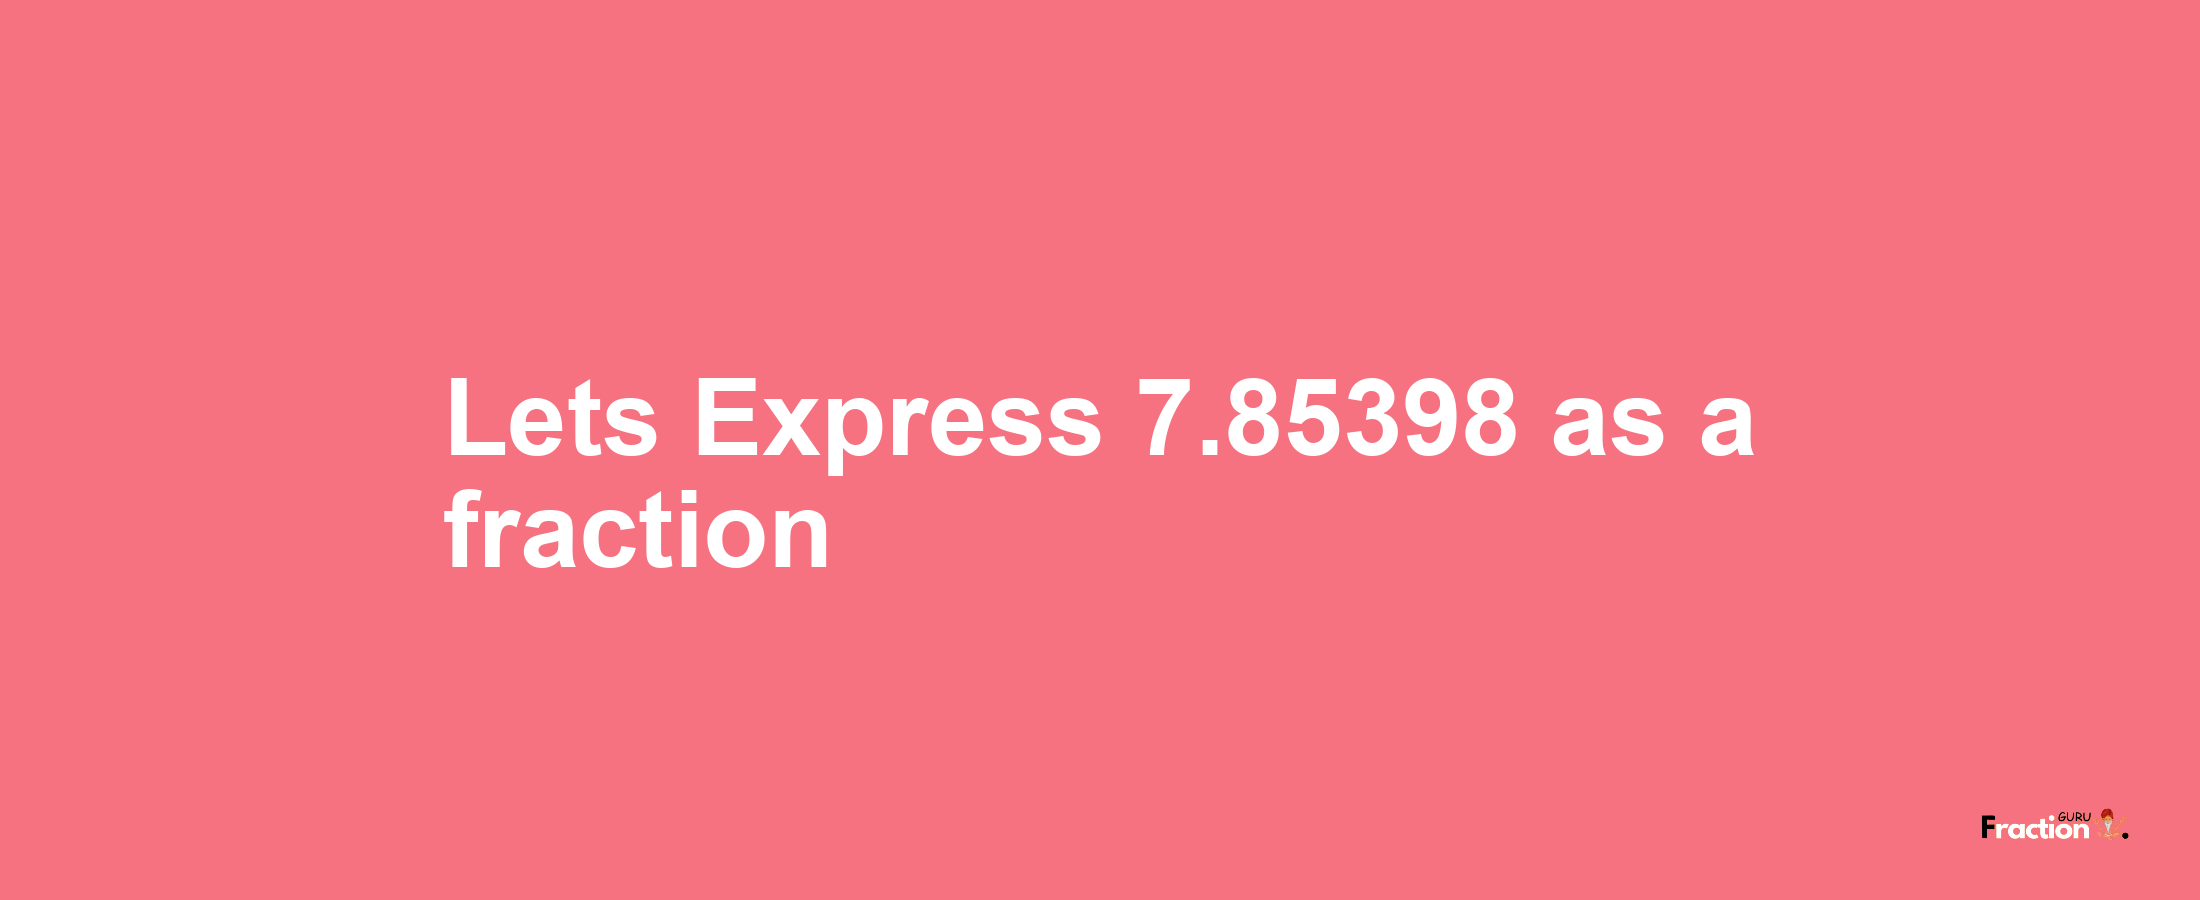 Lets Express 7.85398 as afraction